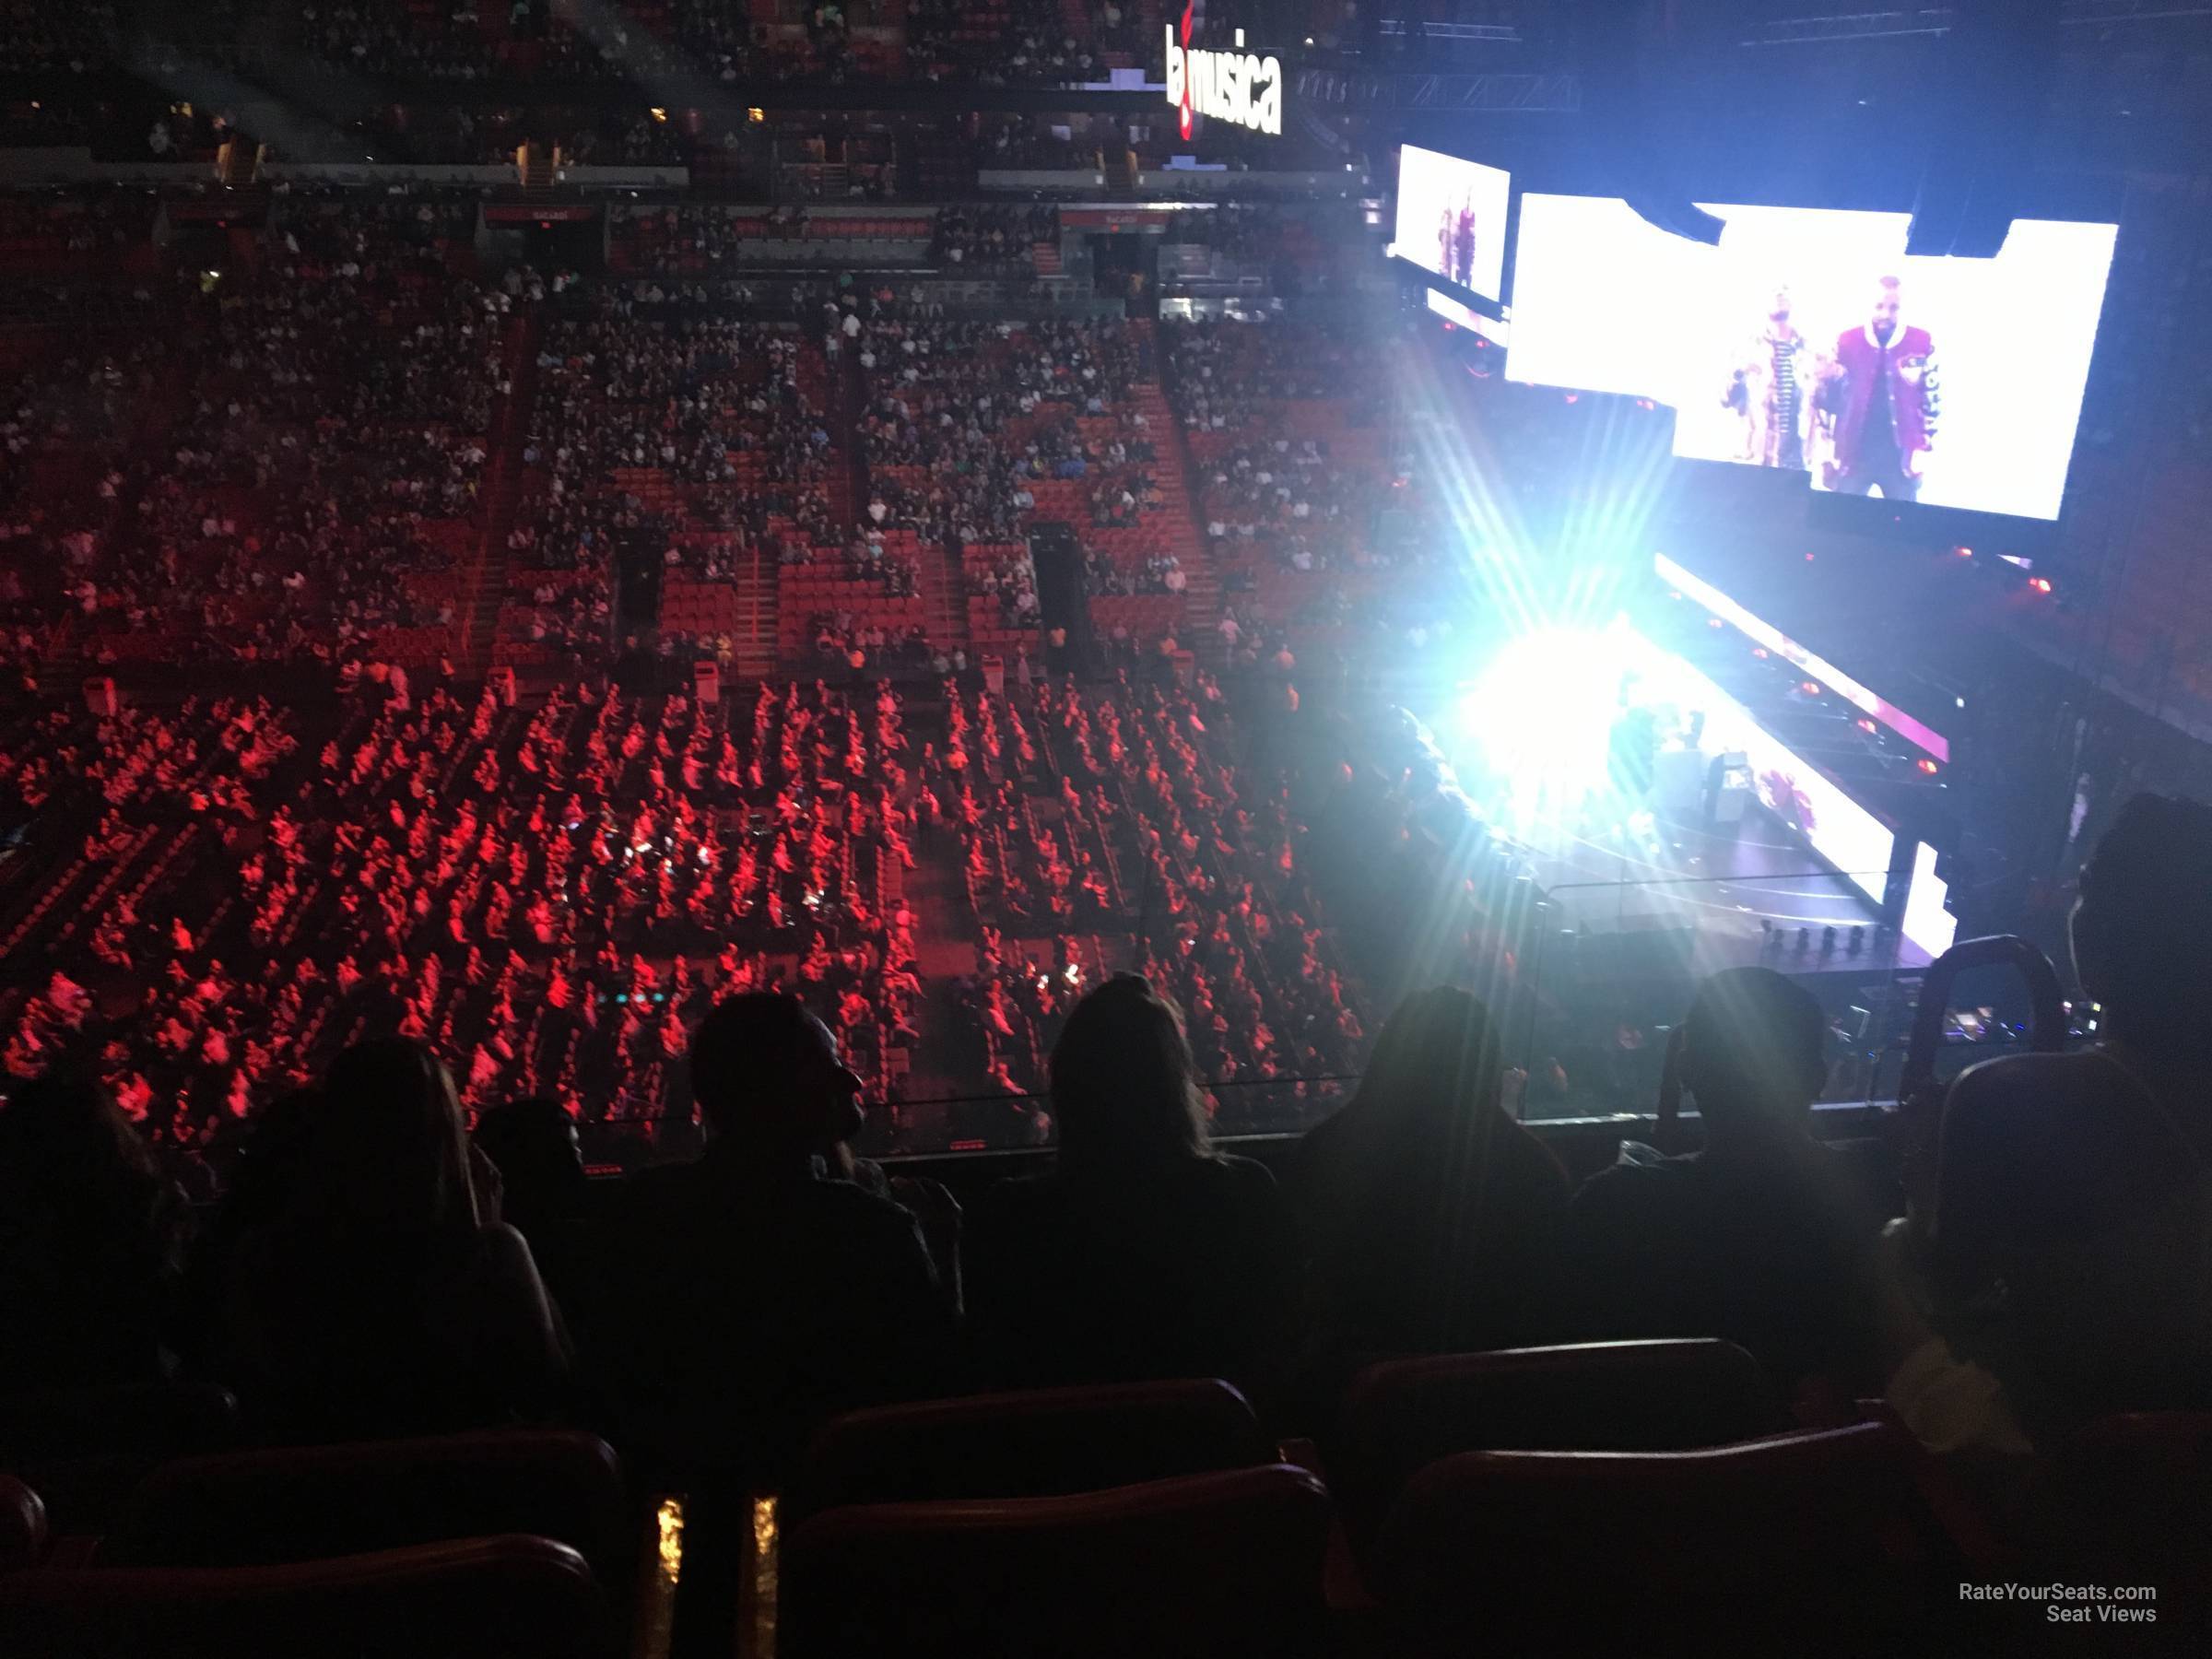 section 308, row 3 seat view  for concert - miami-dade arena